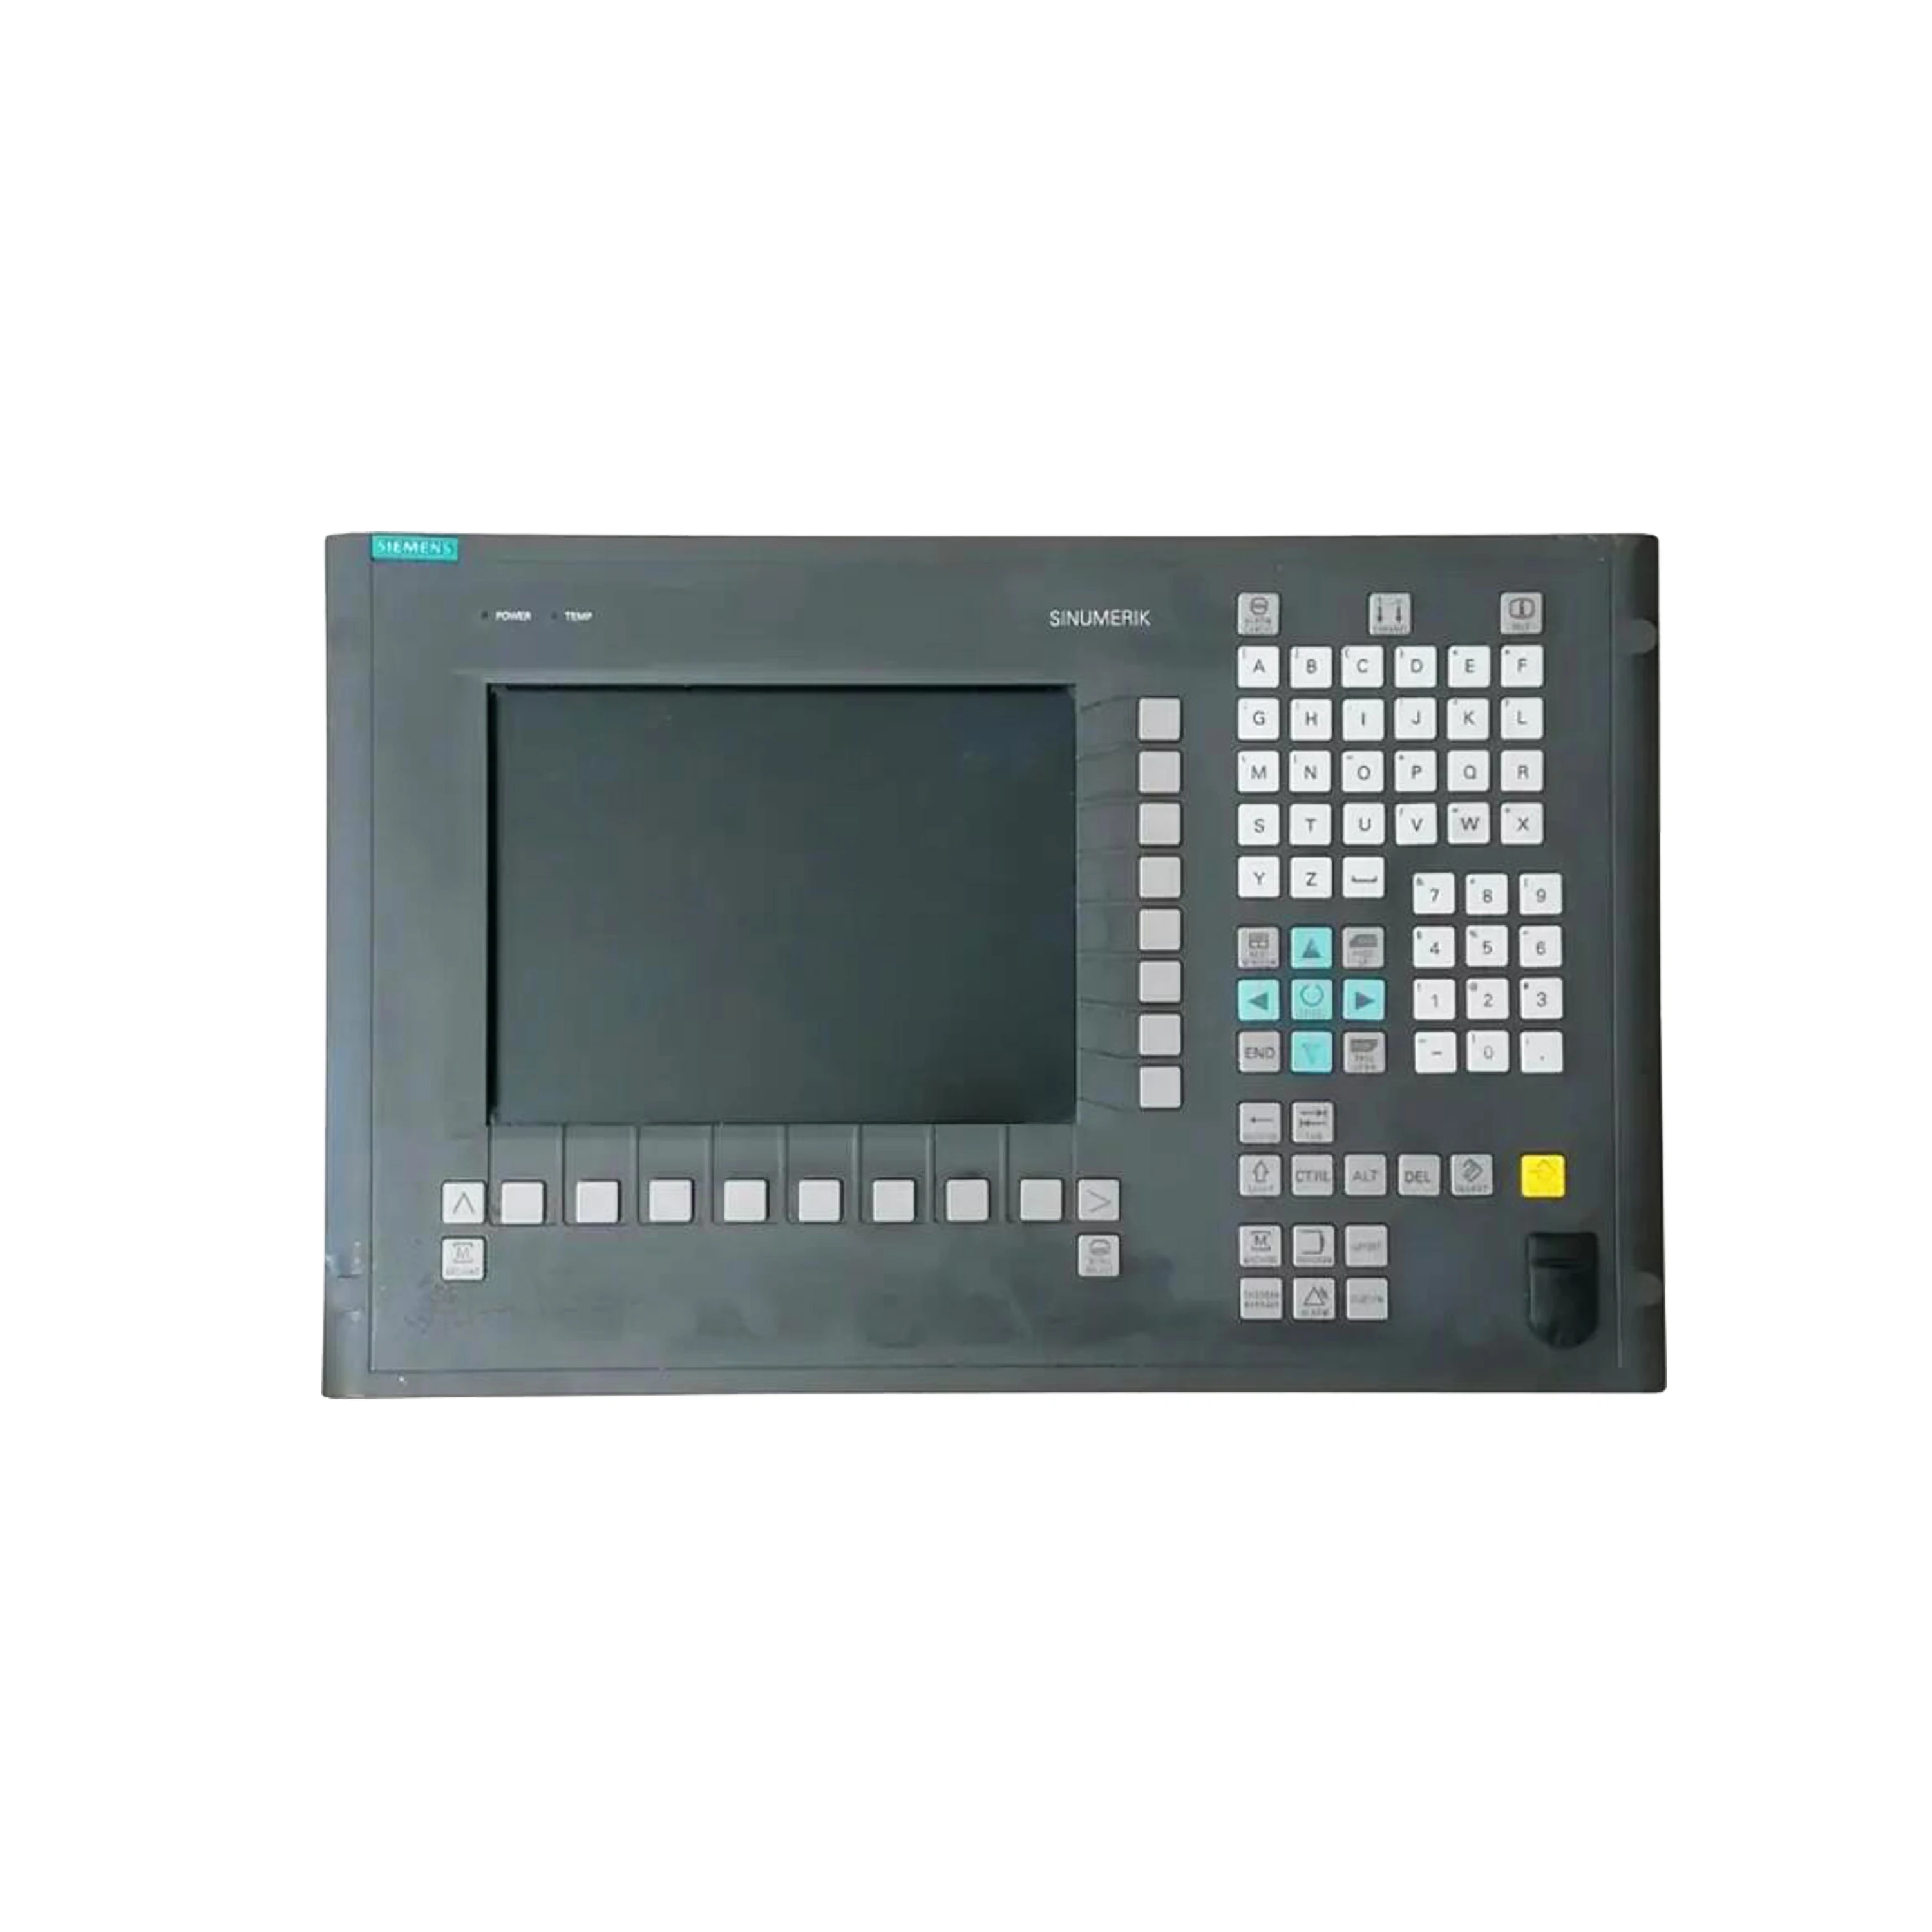 100% Brand and Package New Panel Control Unit CNC Touch Screen PLC OP012 HMI 6FC5203-0AF02-0AA2 for Siemens